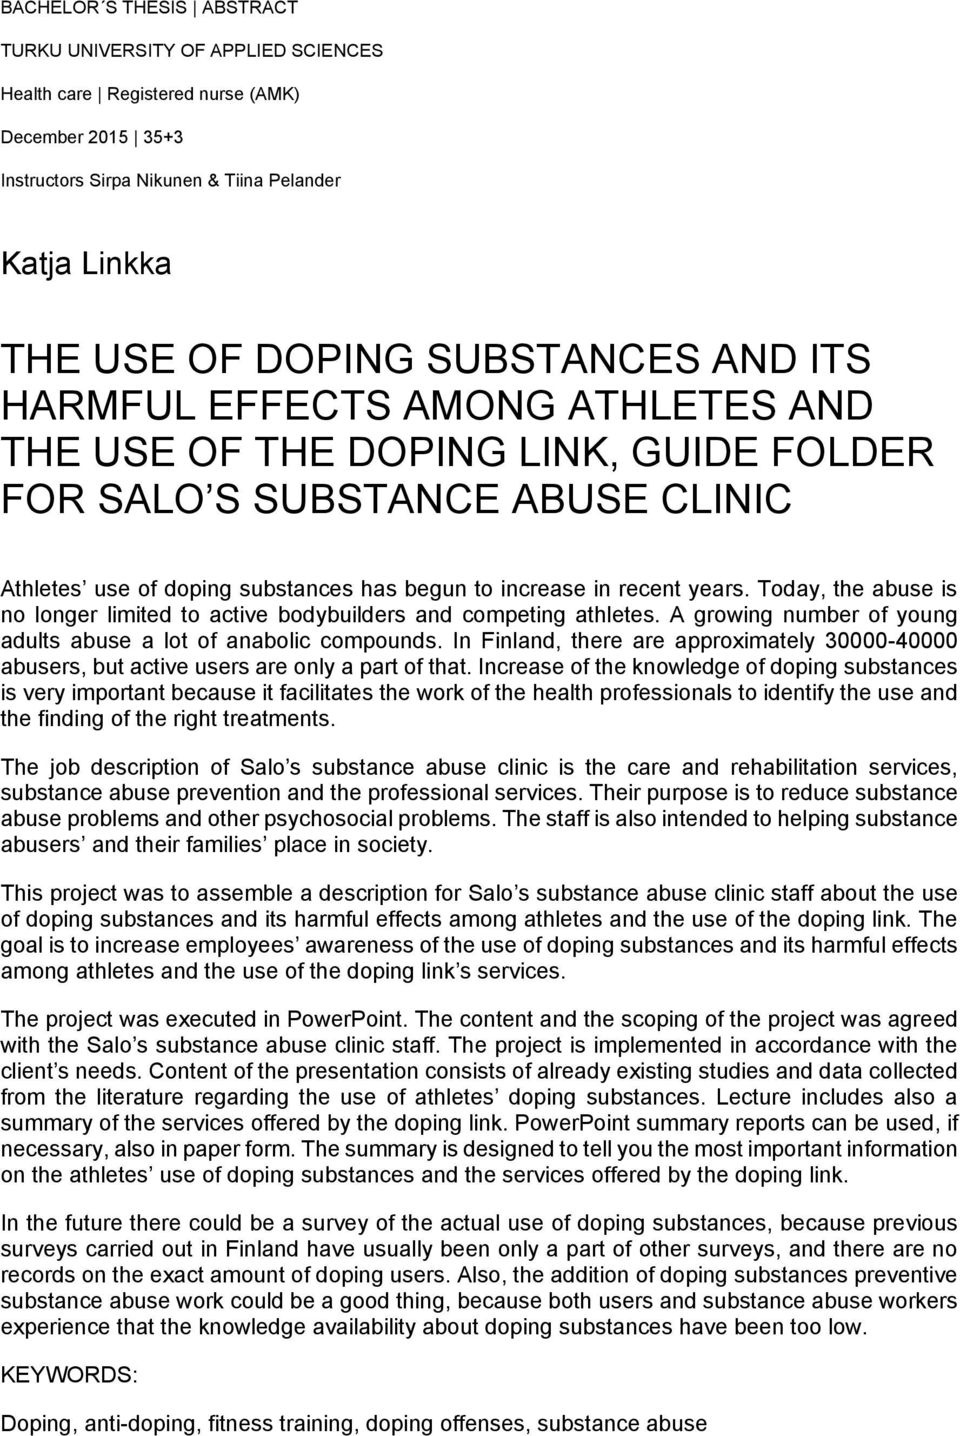 years. Today, the abuse is no longer limited to active bodybuilders and competing athletes. A growing number of young adults abuse a lot of anabolic compounds.